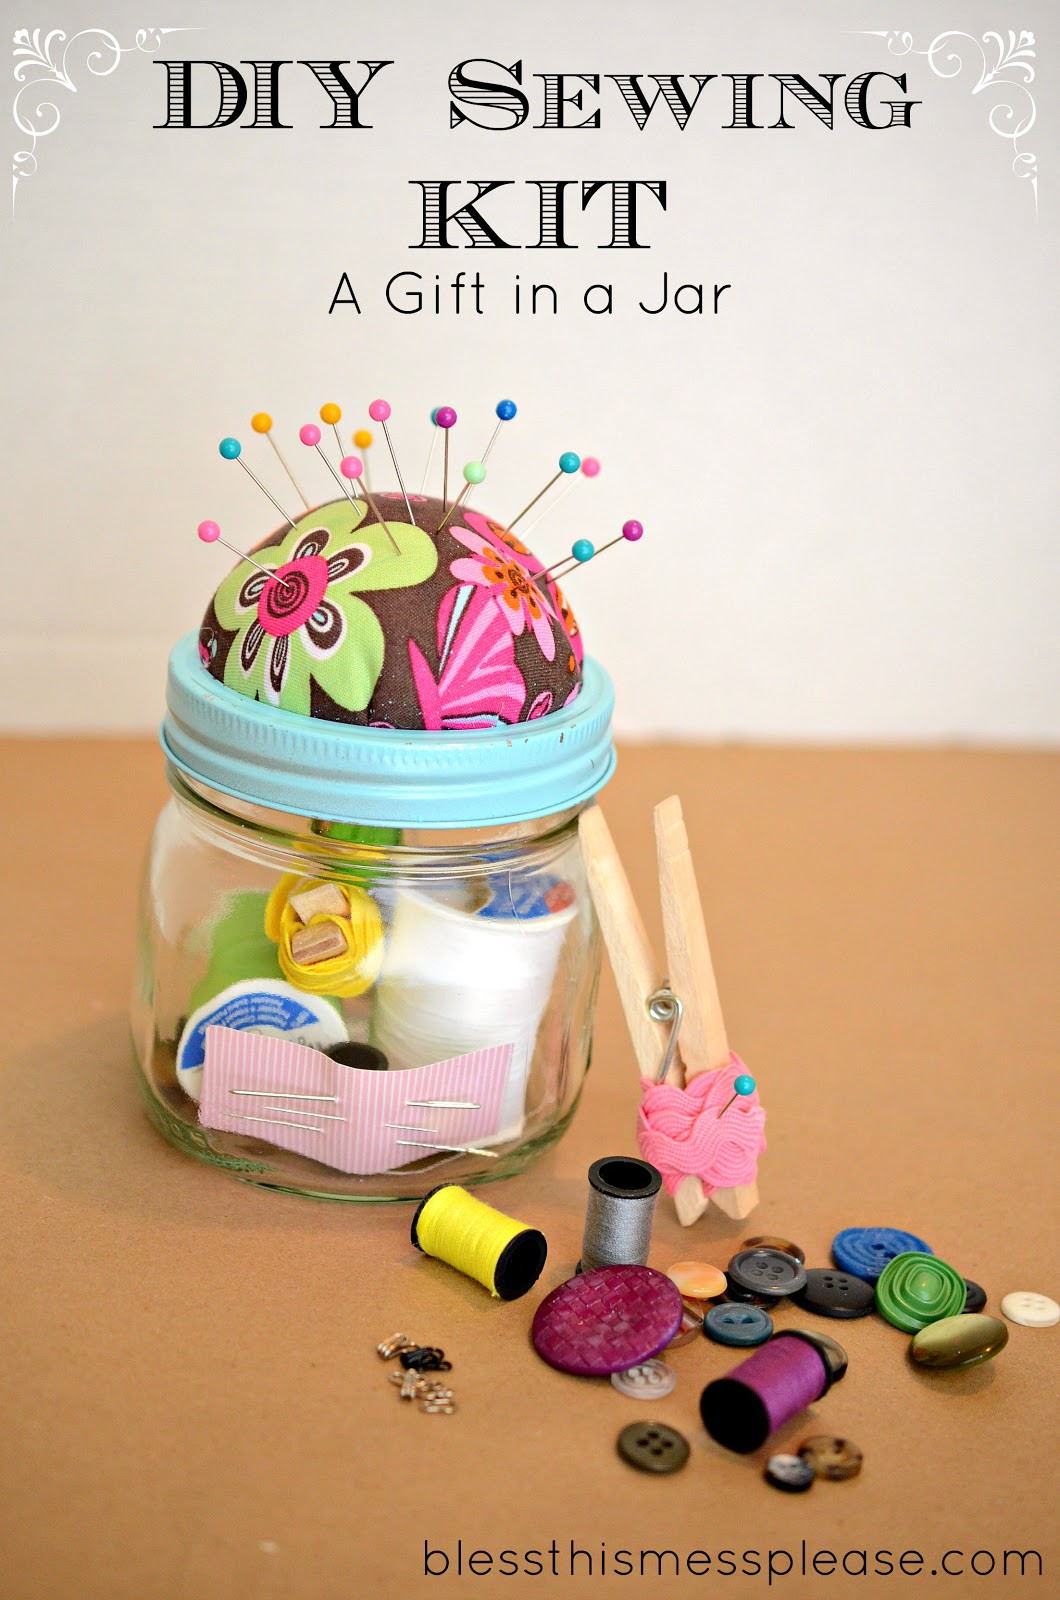 DIY Sew Gifts
 DIY Sewing Kit Gift in a Jar Bless This Mess